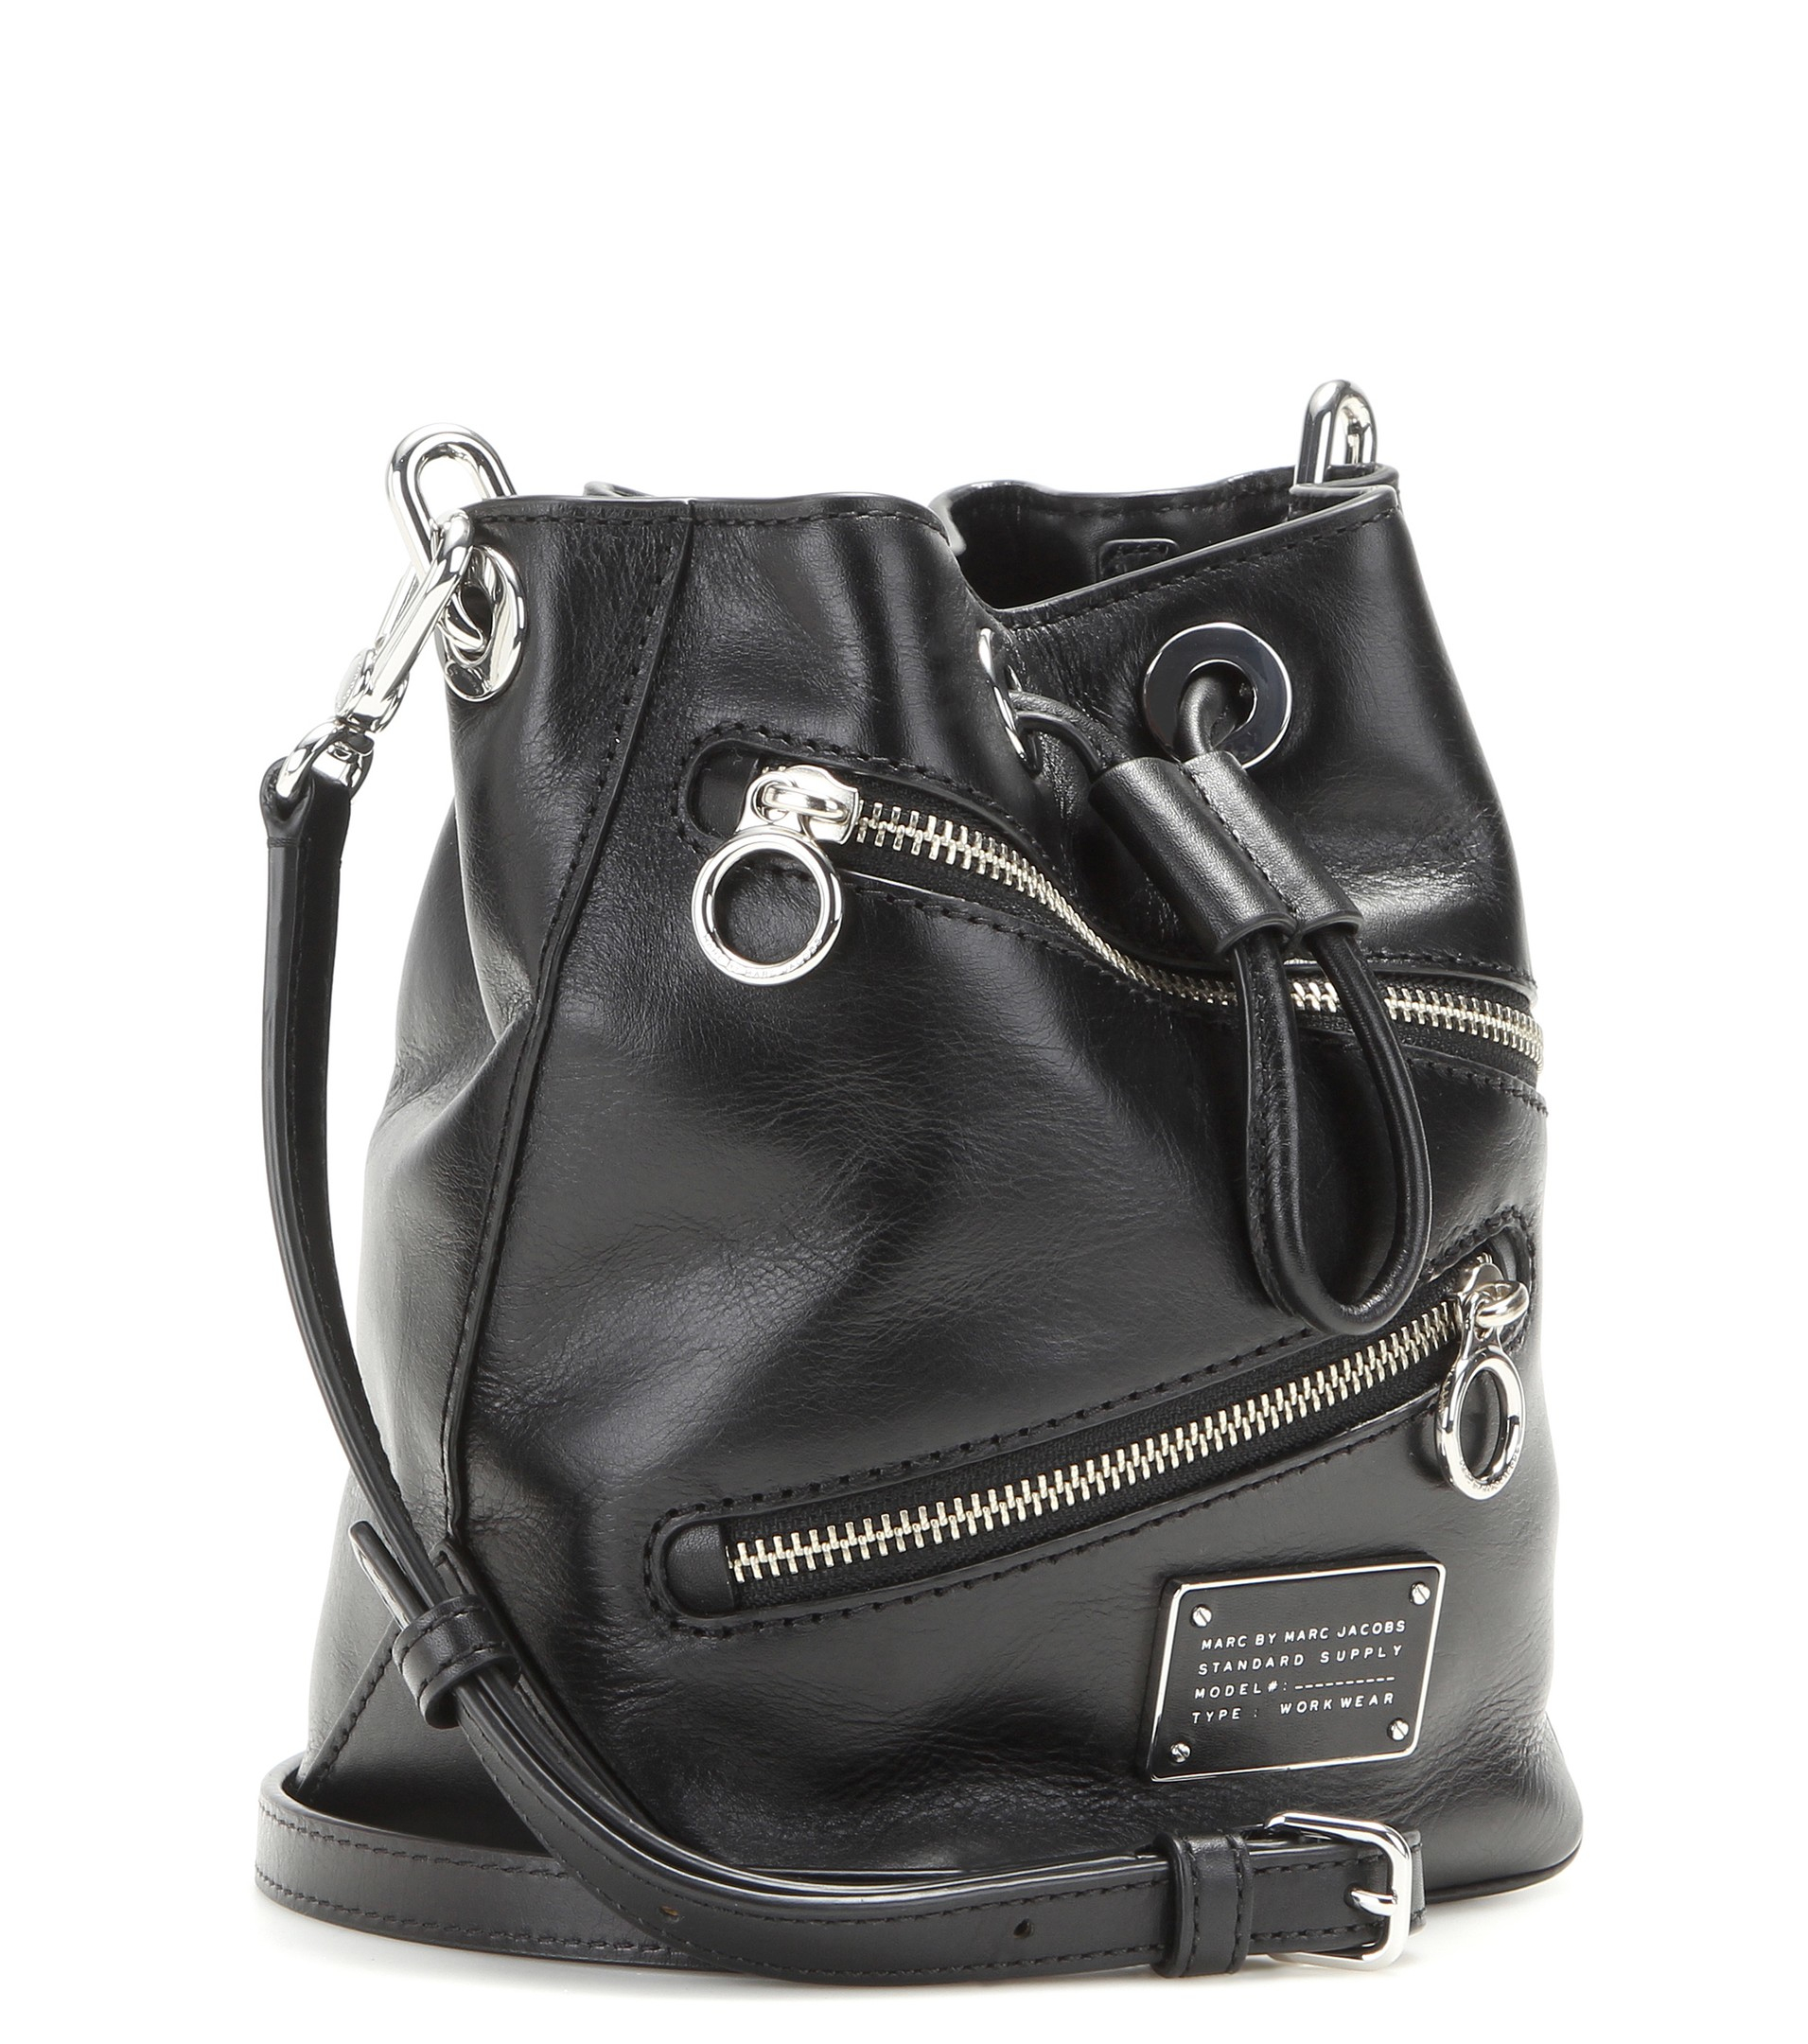 Marc By Marc Jacobs Small Leather Bucket Bag in Black - Lyst